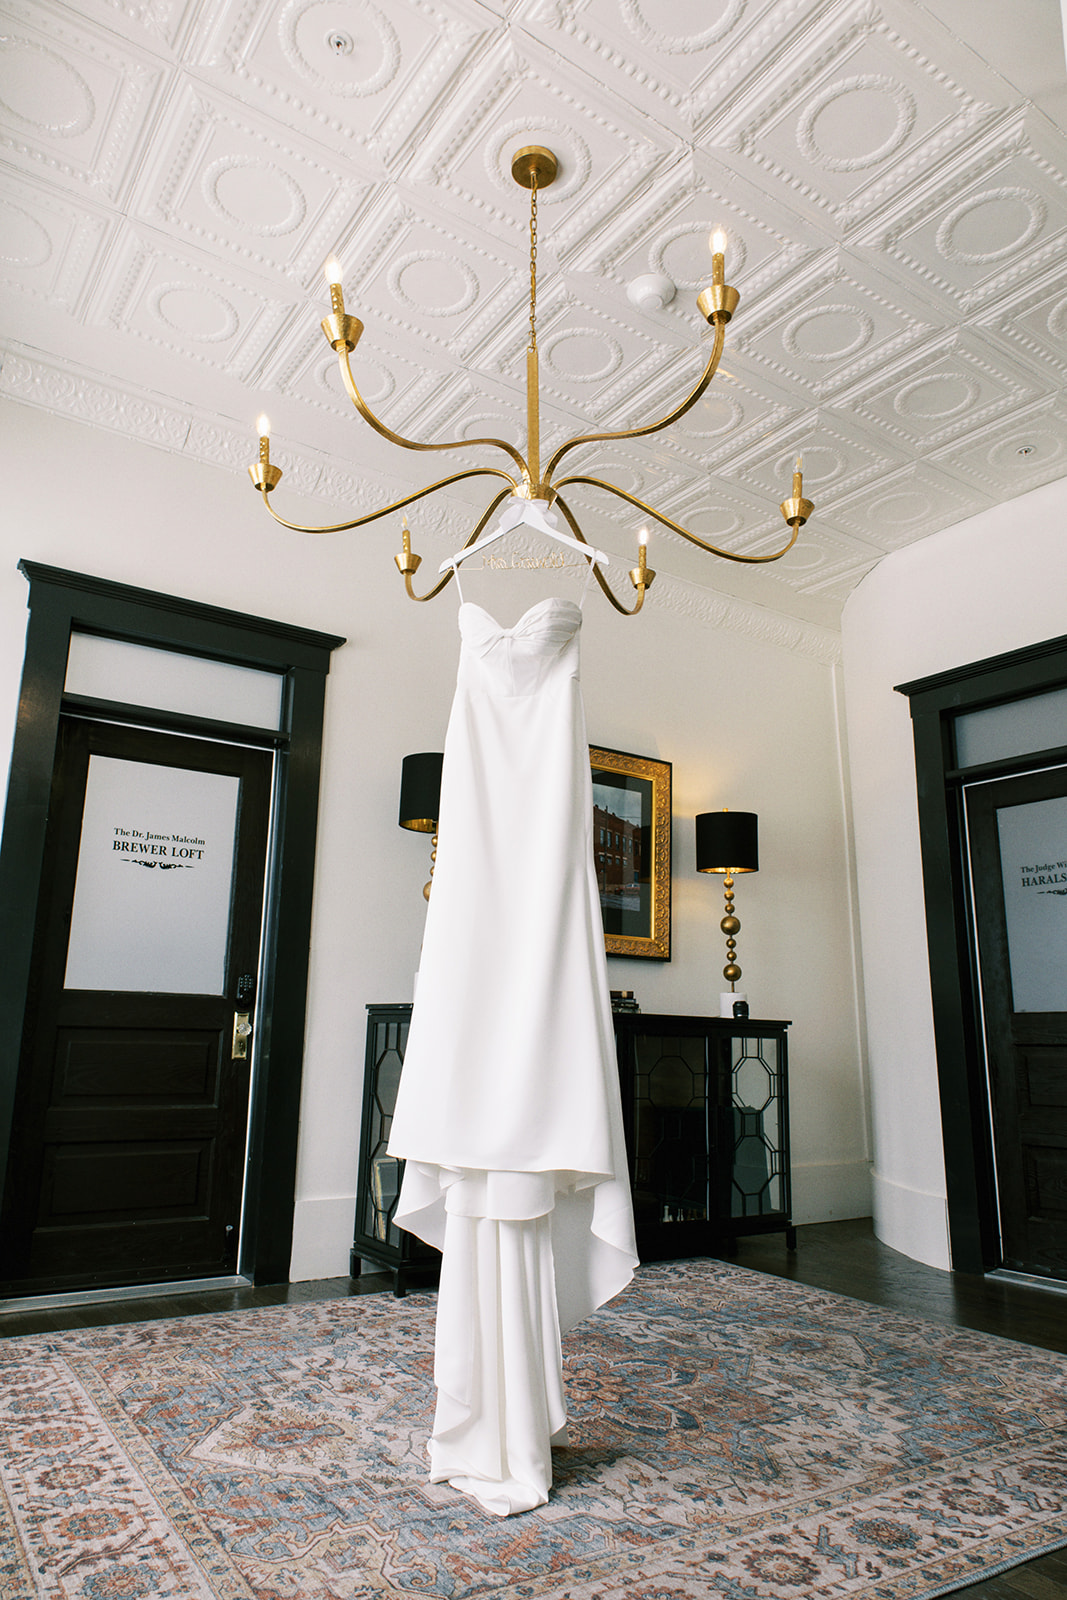 Bride's dress hangs from chandelier at the Lofts on Gault in Fort Payne, Alabama